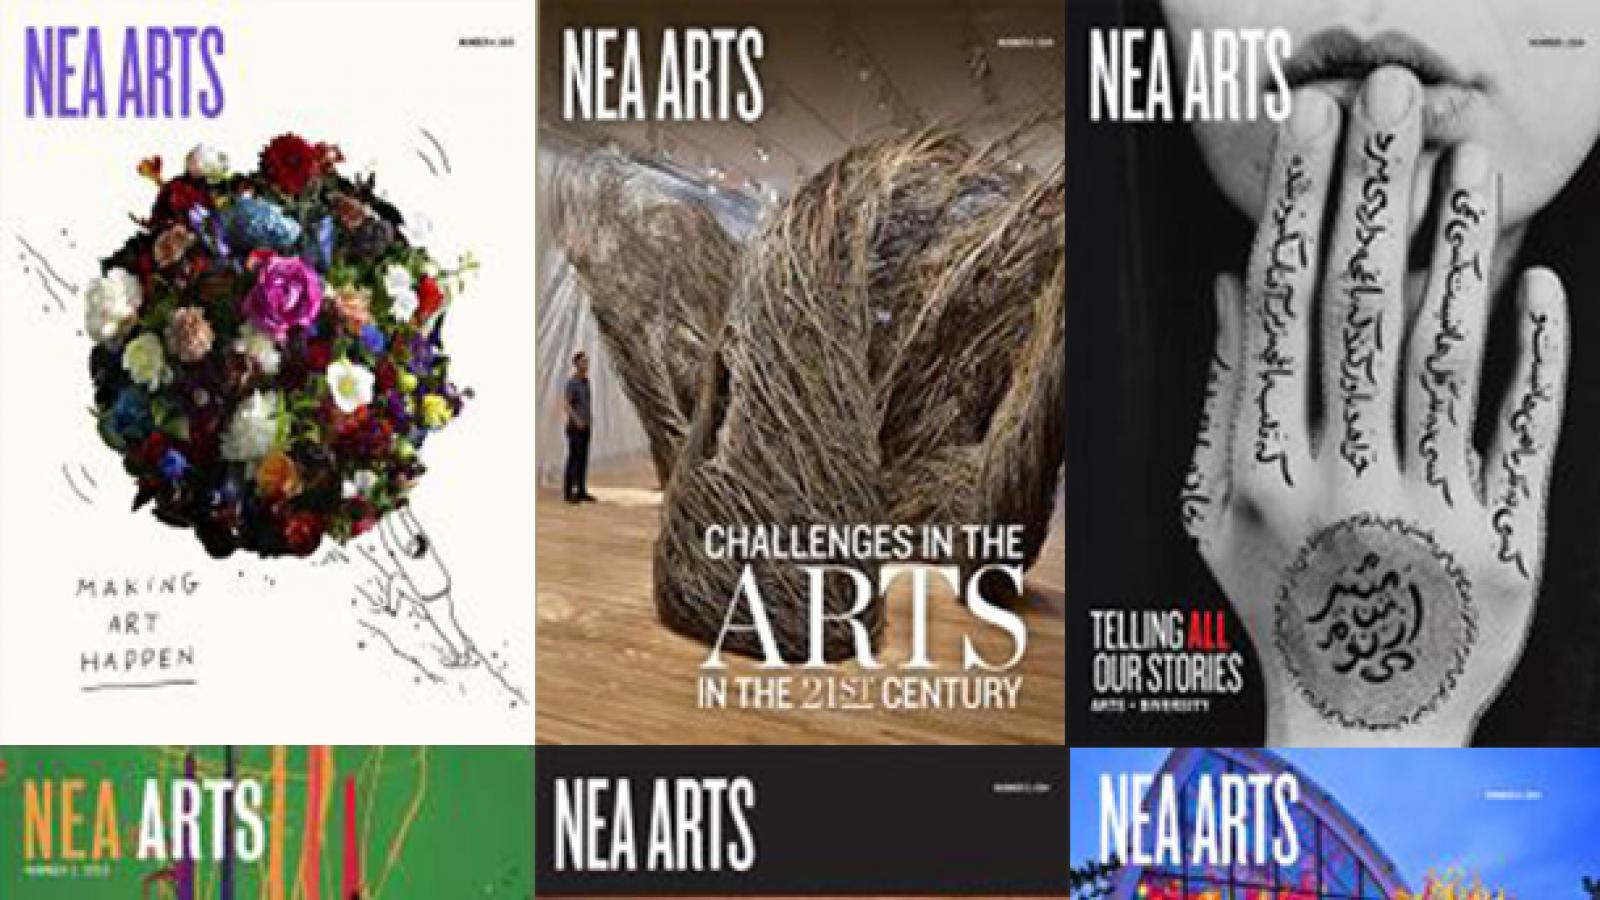 Six covers of past issues of the National Endowment for the Arts magazine